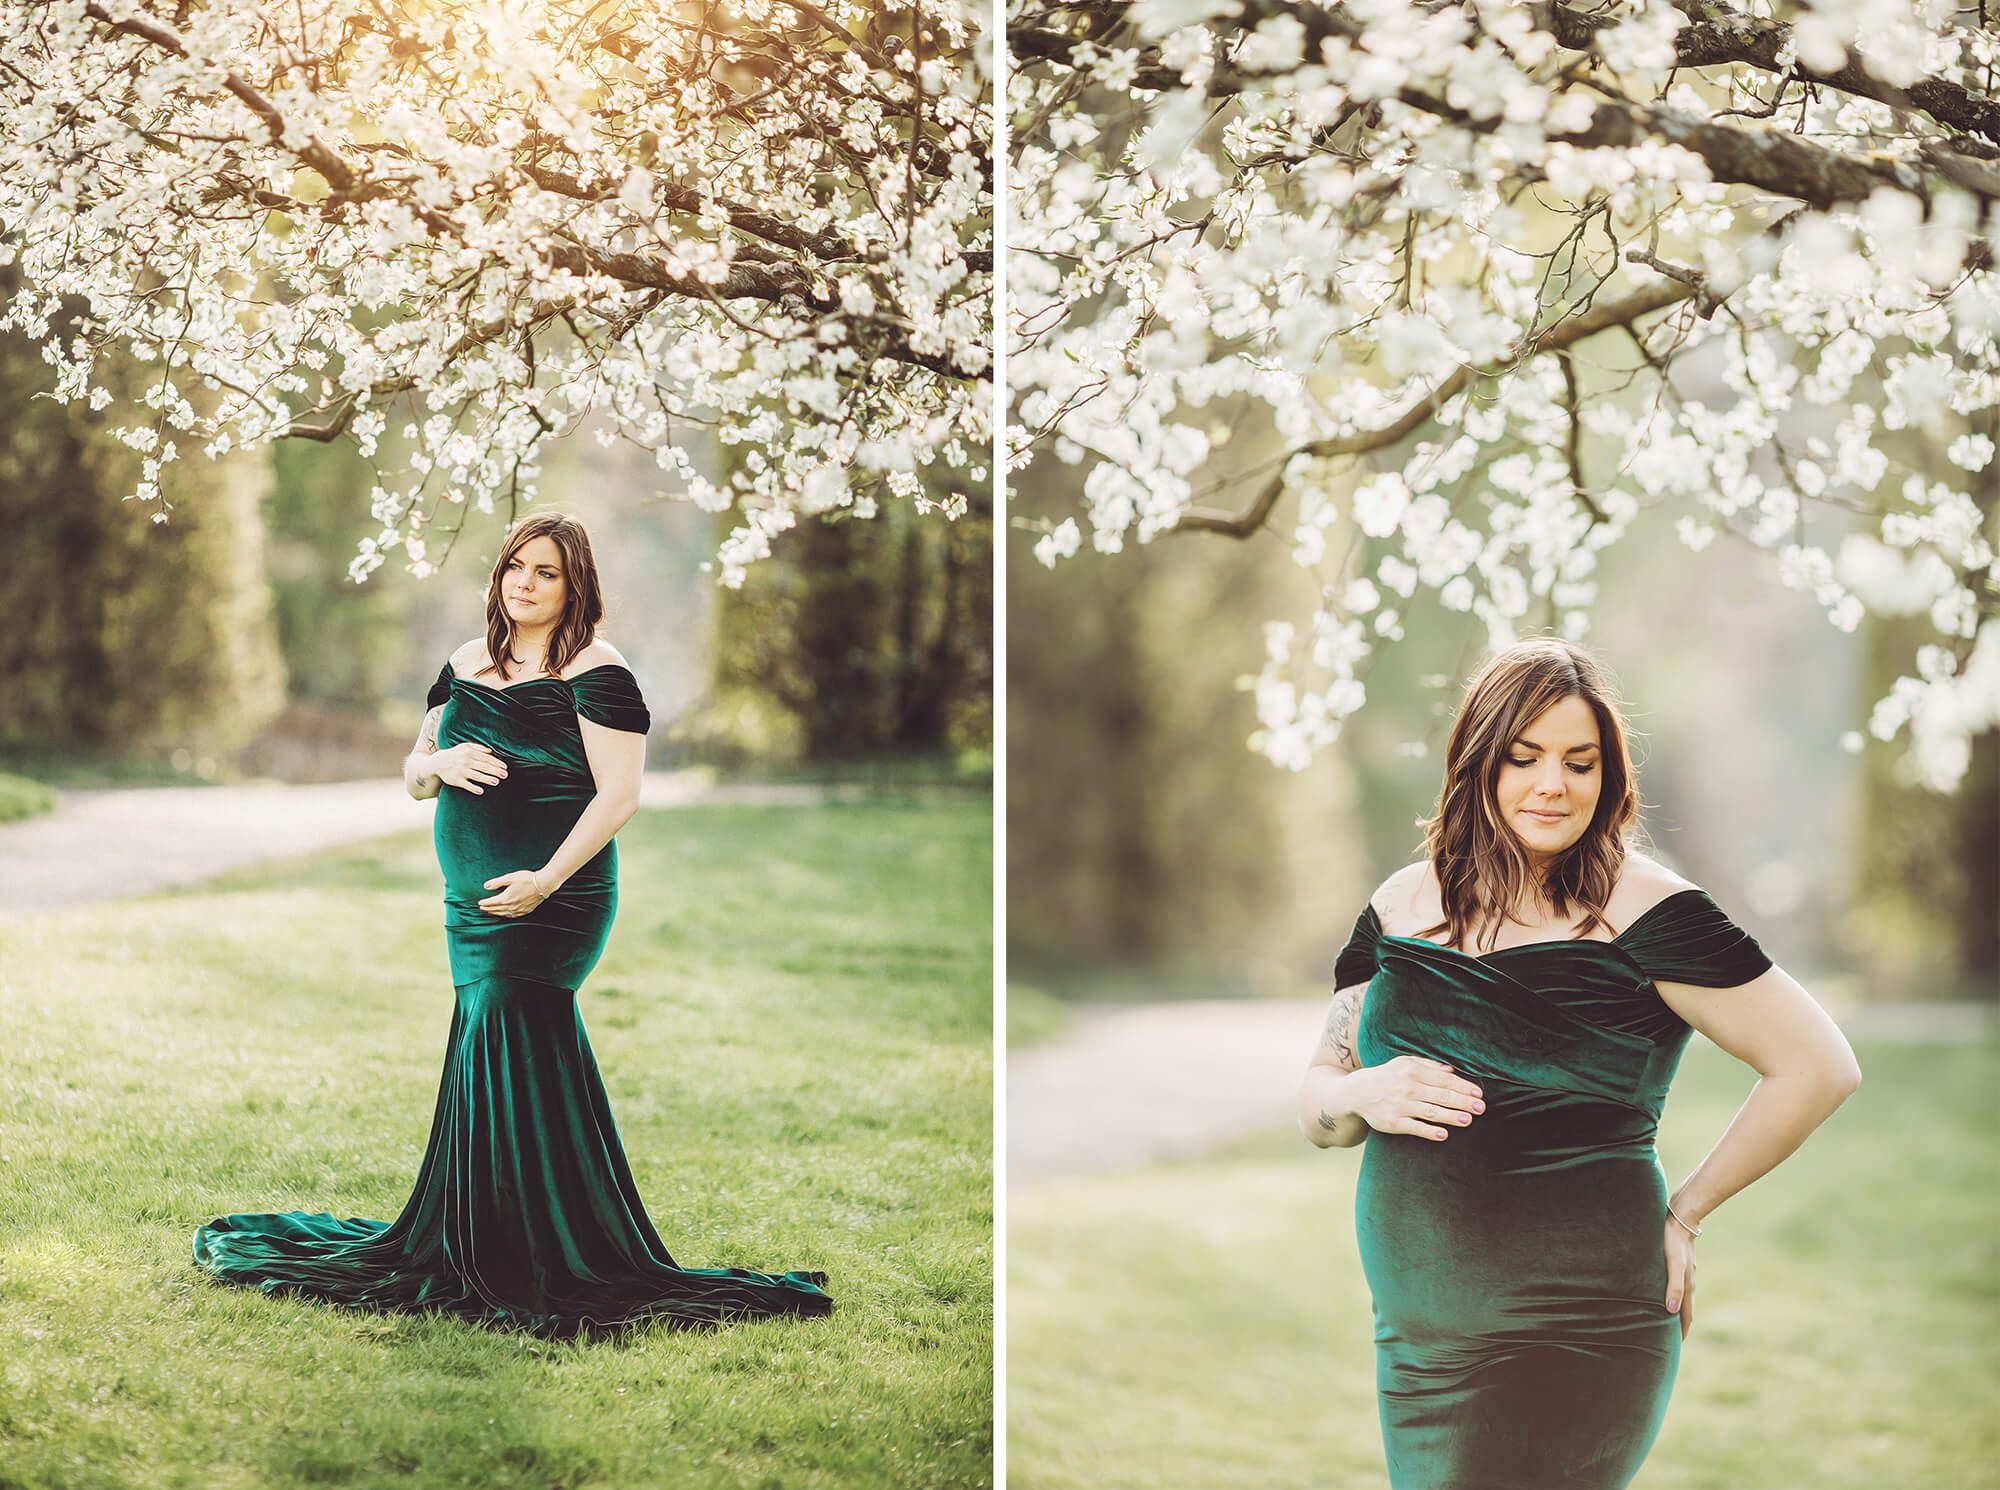 The incredible blossoms create a magical spring canopy for Christina during her maternity session.